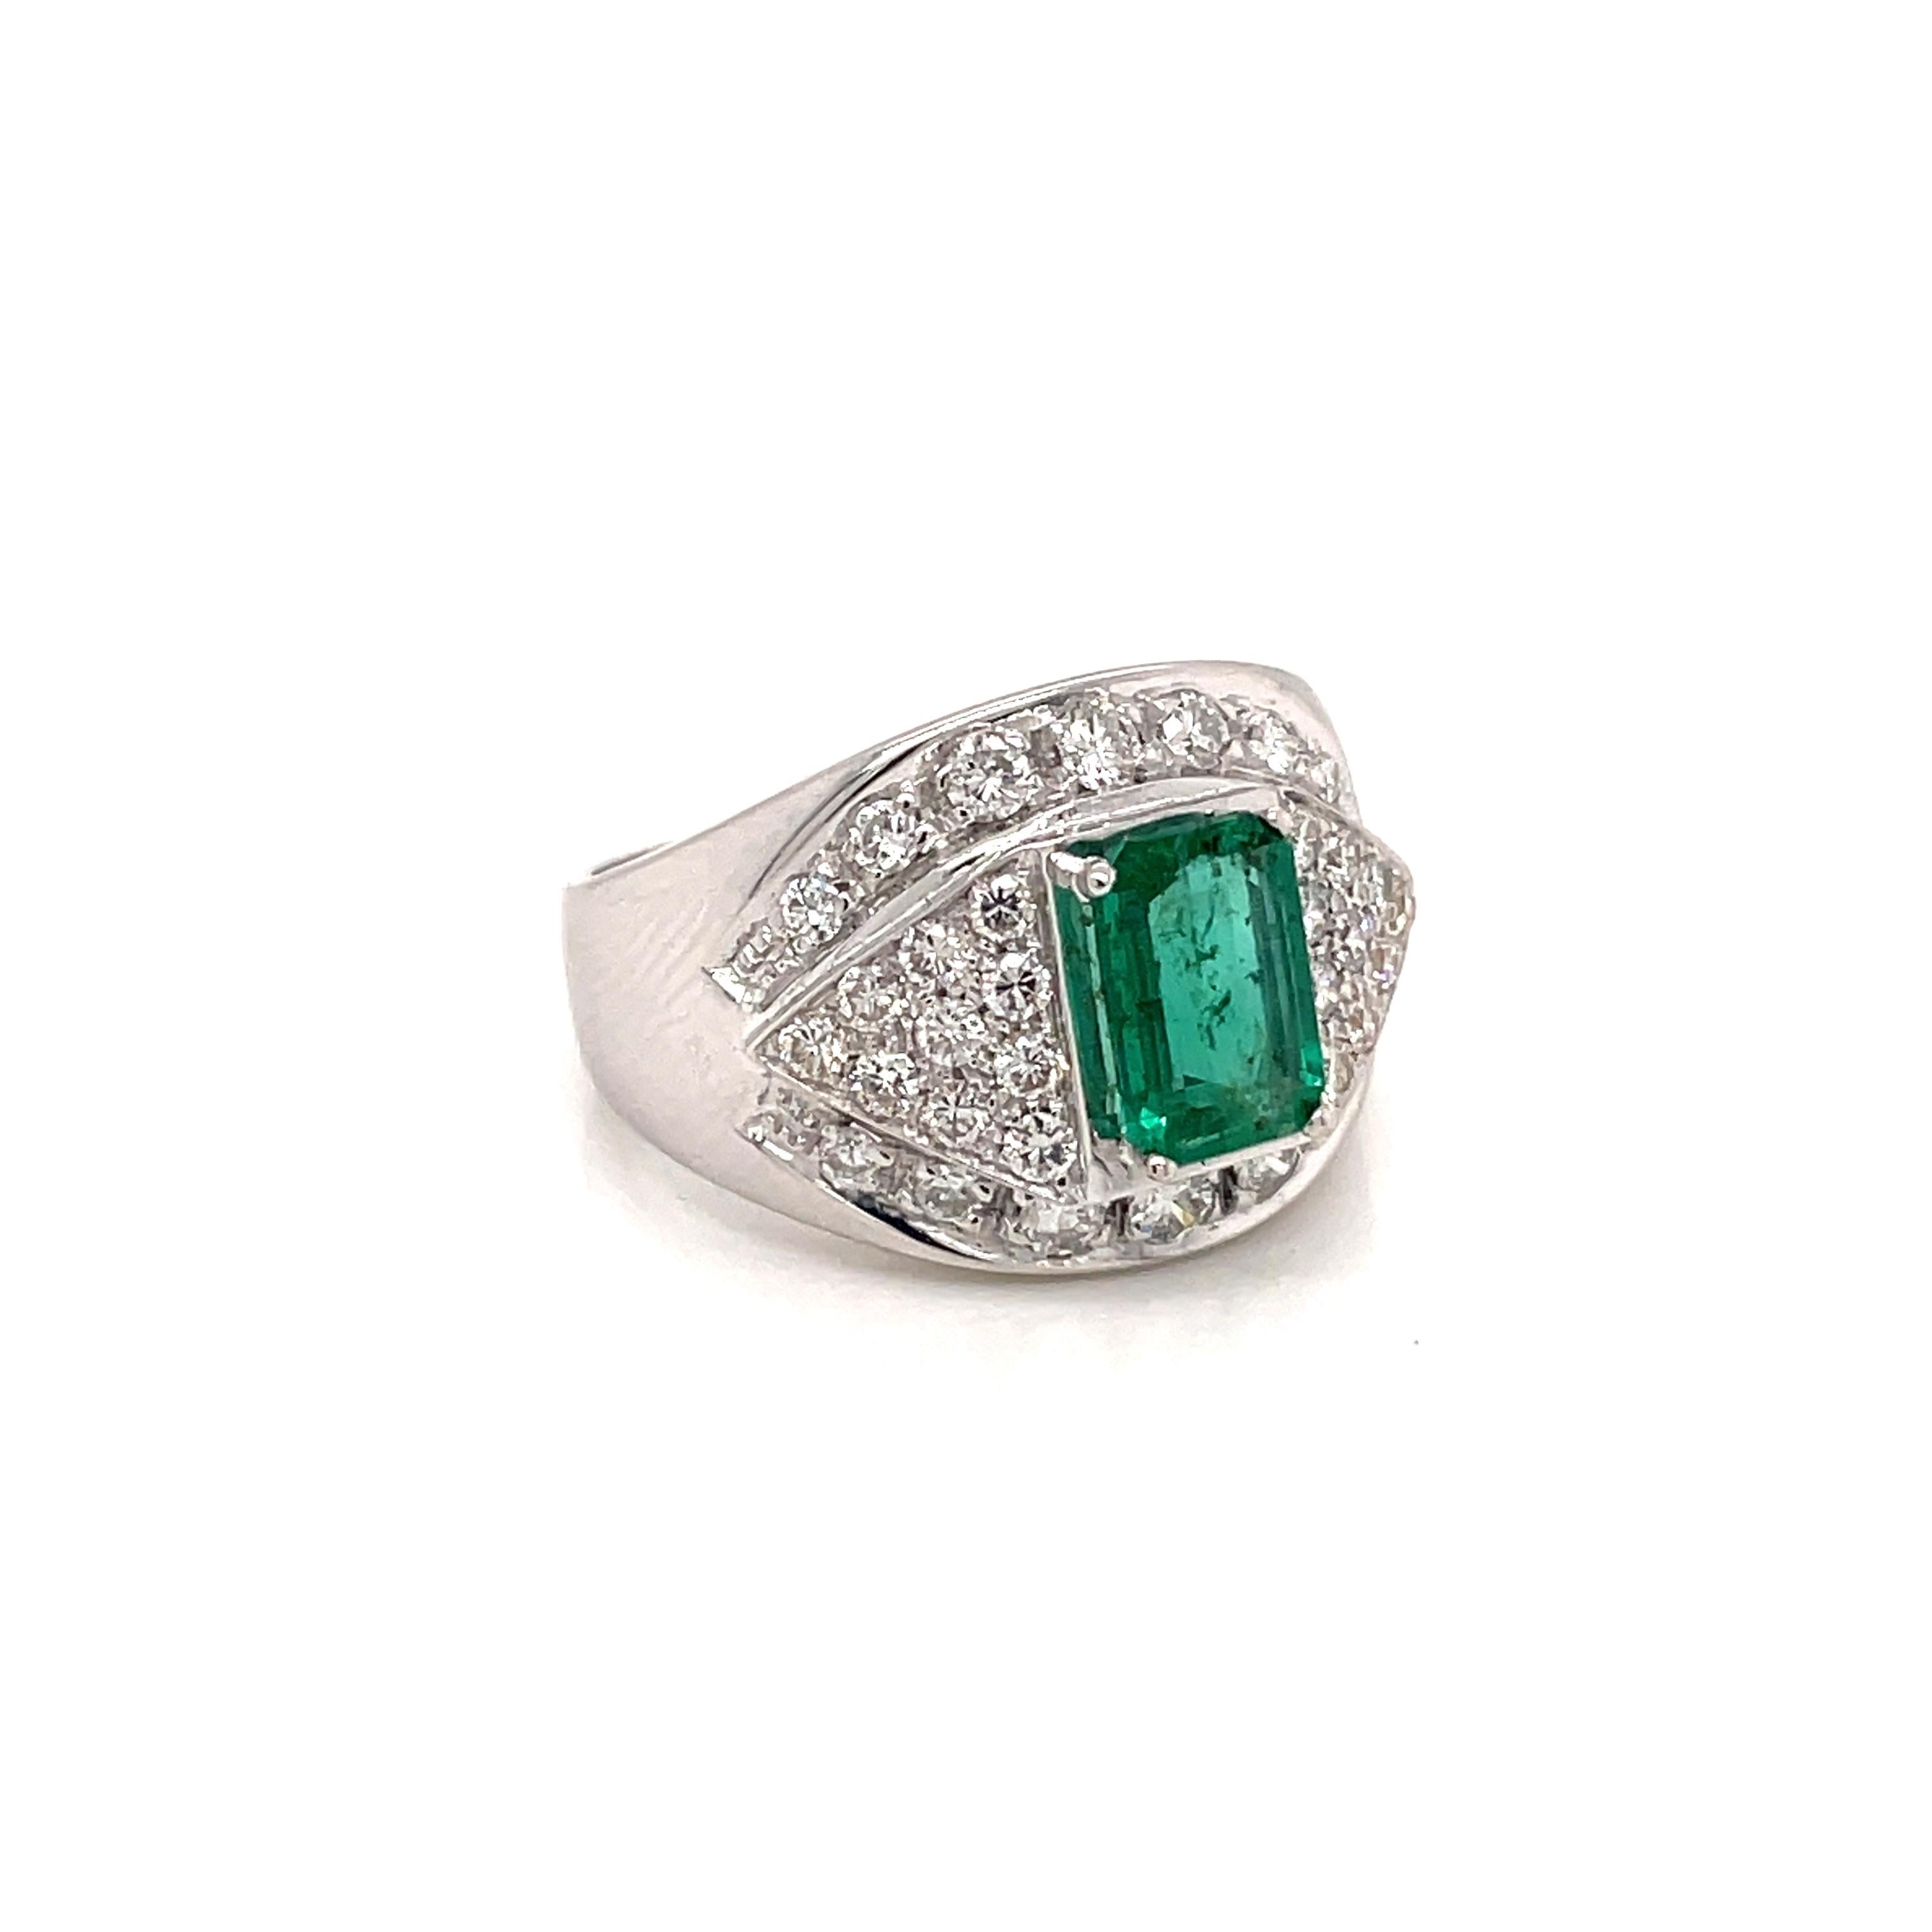 Beautiful Retro Cocktail Ring mounted in 18k white gold set with a natural Colombian Emerald weighing 1.50 cts surrounded by approx. 1.50 carat of round brilliant cut diamonds graded G color Vvs.

CONDITION: Pre-owned - Excellent 
METAL:18k gold
GEM